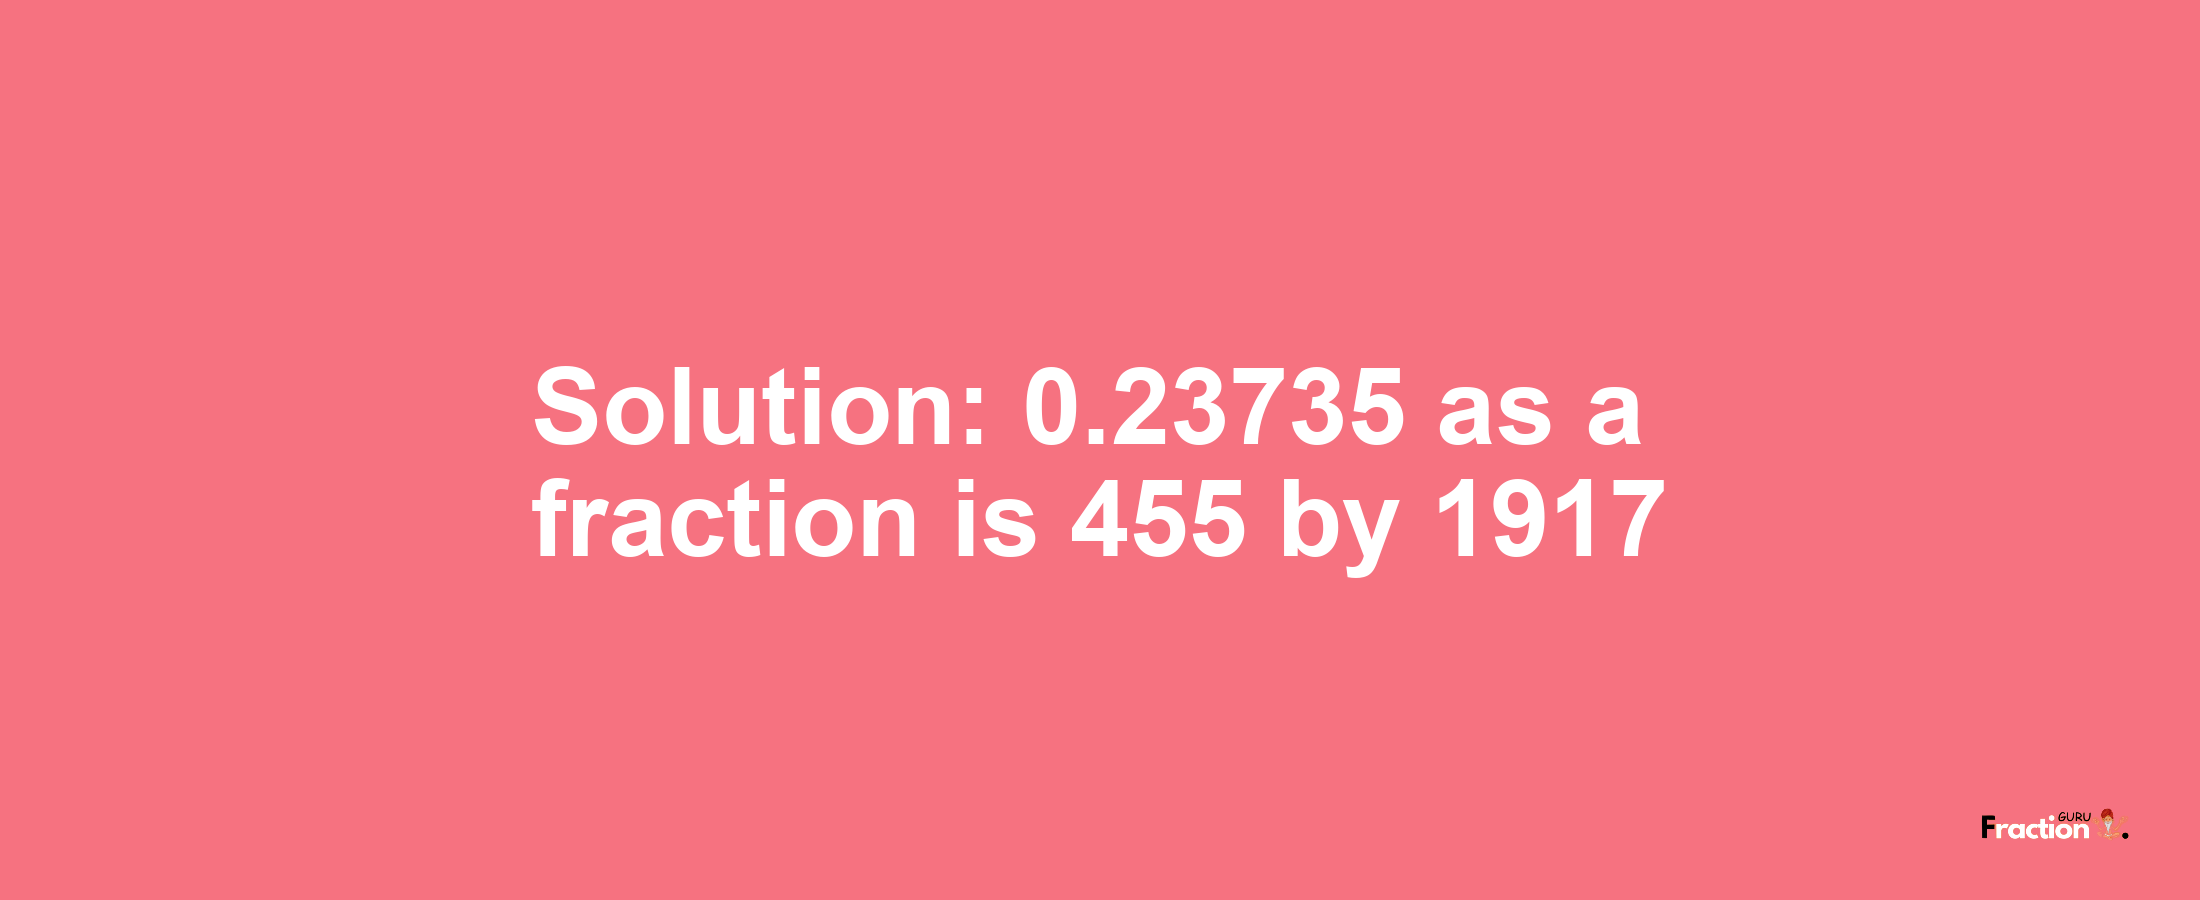 Solution:0.23735 as a fraction is 455/1917